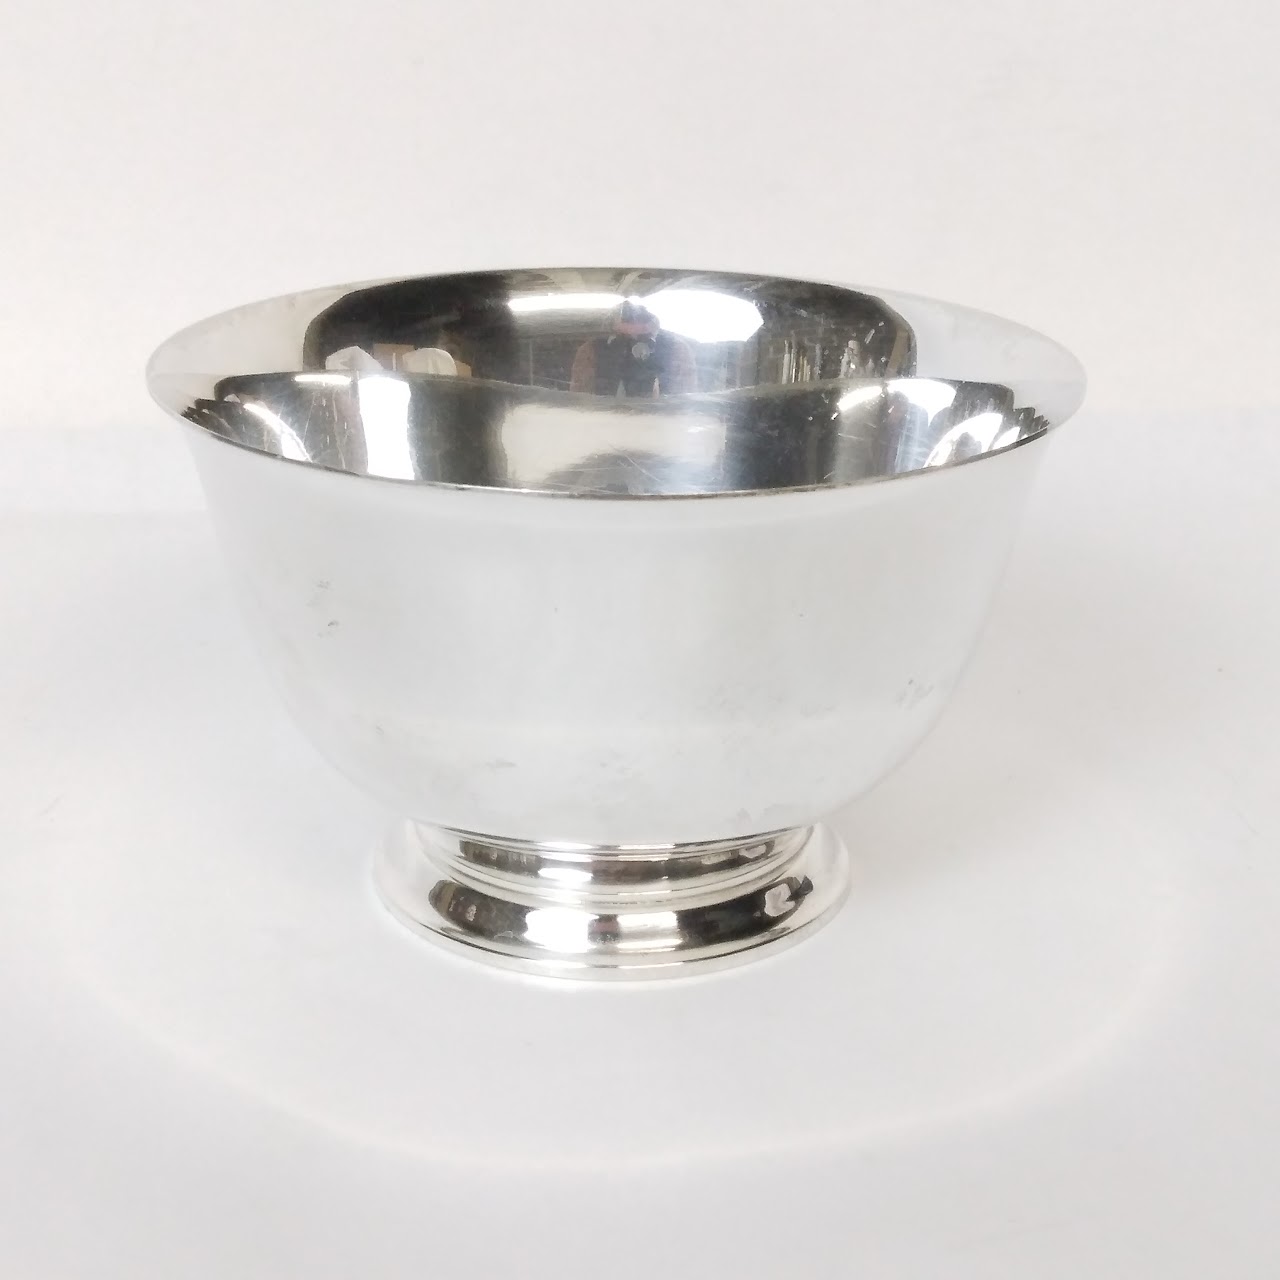 Tiffany & Co. Sterling Silver Footed Bowl